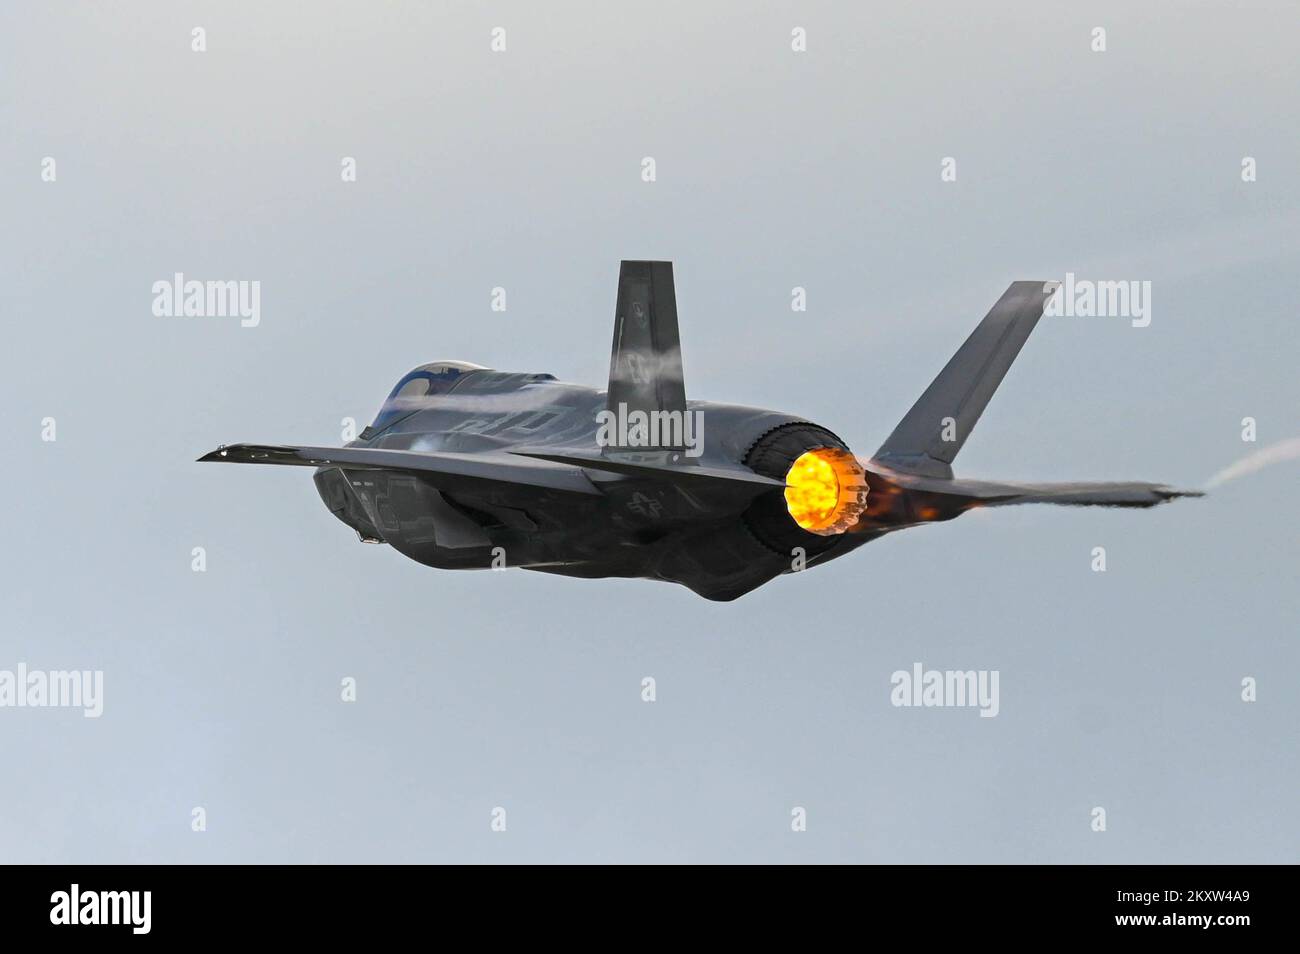 https://c8.alamy.com/comp/2KXW4A9/a-us-air-force-f-35a-lightning-ii-from-the-58th-fighter-squadron-33rd-fighter-wing-eglin-air-force-base-florida-takes-off-for-a-training-mission-during-northern-lightning-at-volk-field-air-national-guard-base-wisconsin-aug-15-2022-volk-field-offers-open-airspace-with-optimal-weather-conditions-for-flying-allowing-the-33rd-fw-to-avoid-over-60-of-seasonal-lightning-and-hurricane-delays-in-florida-us-air-force-photo-by-airman-christian-corley-2KXW4A9.jpg